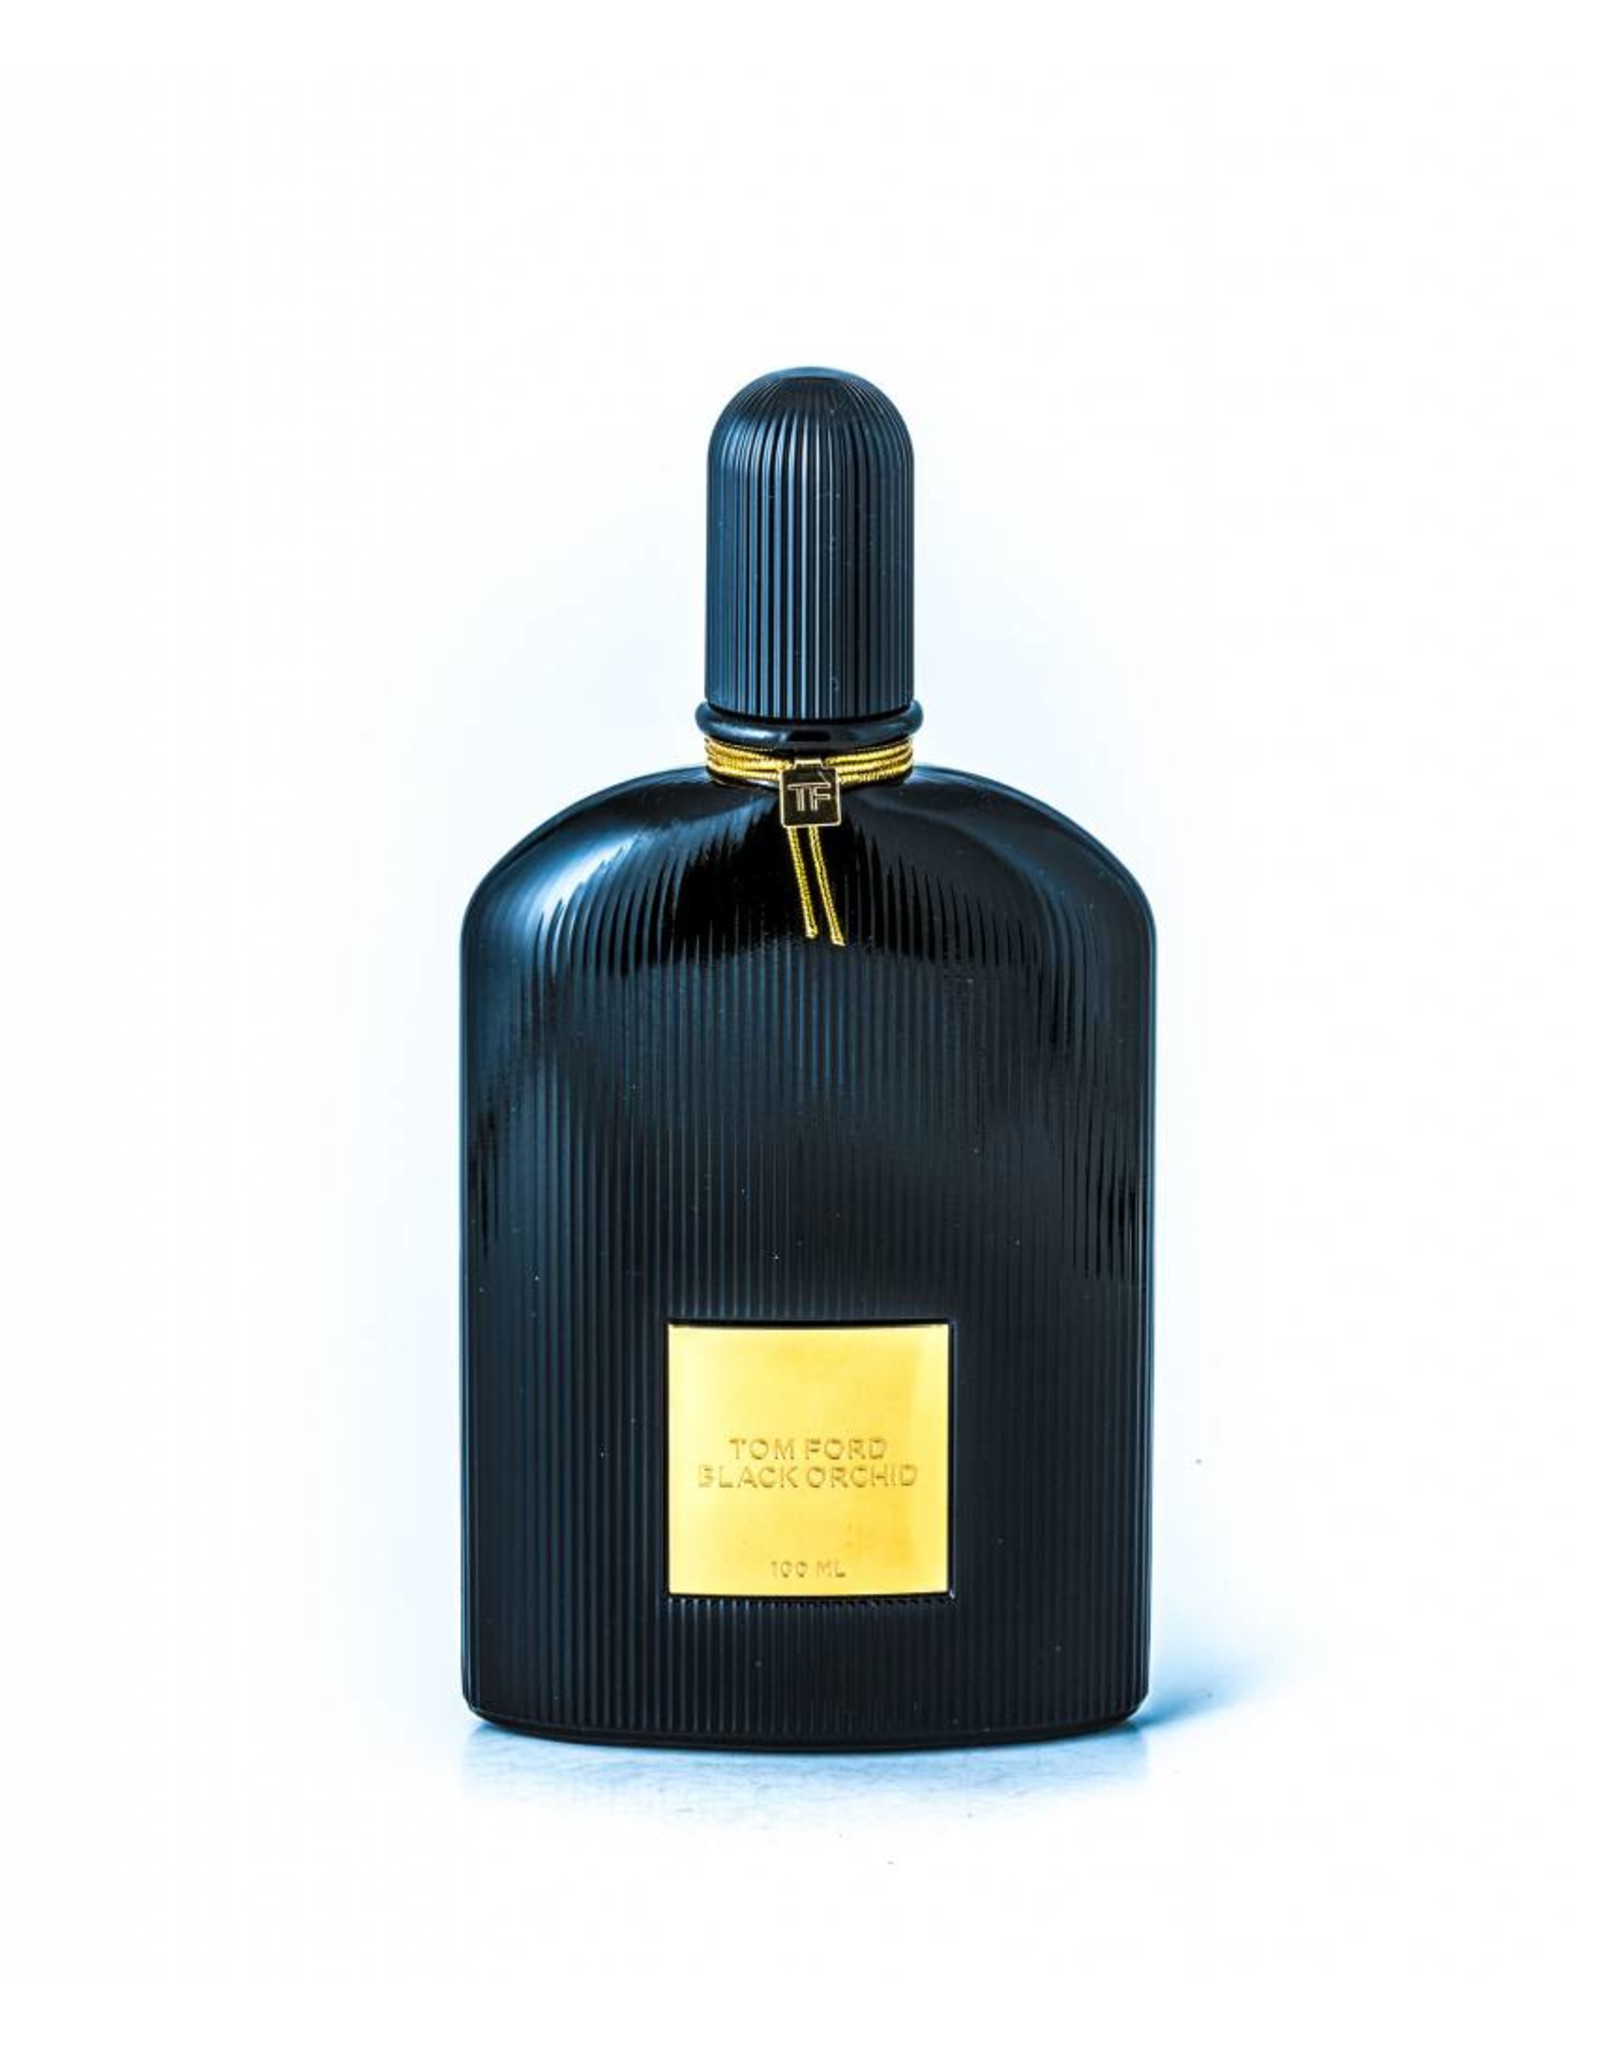 TOM FORD BLACK ORCHID - PARFUM DIRECT